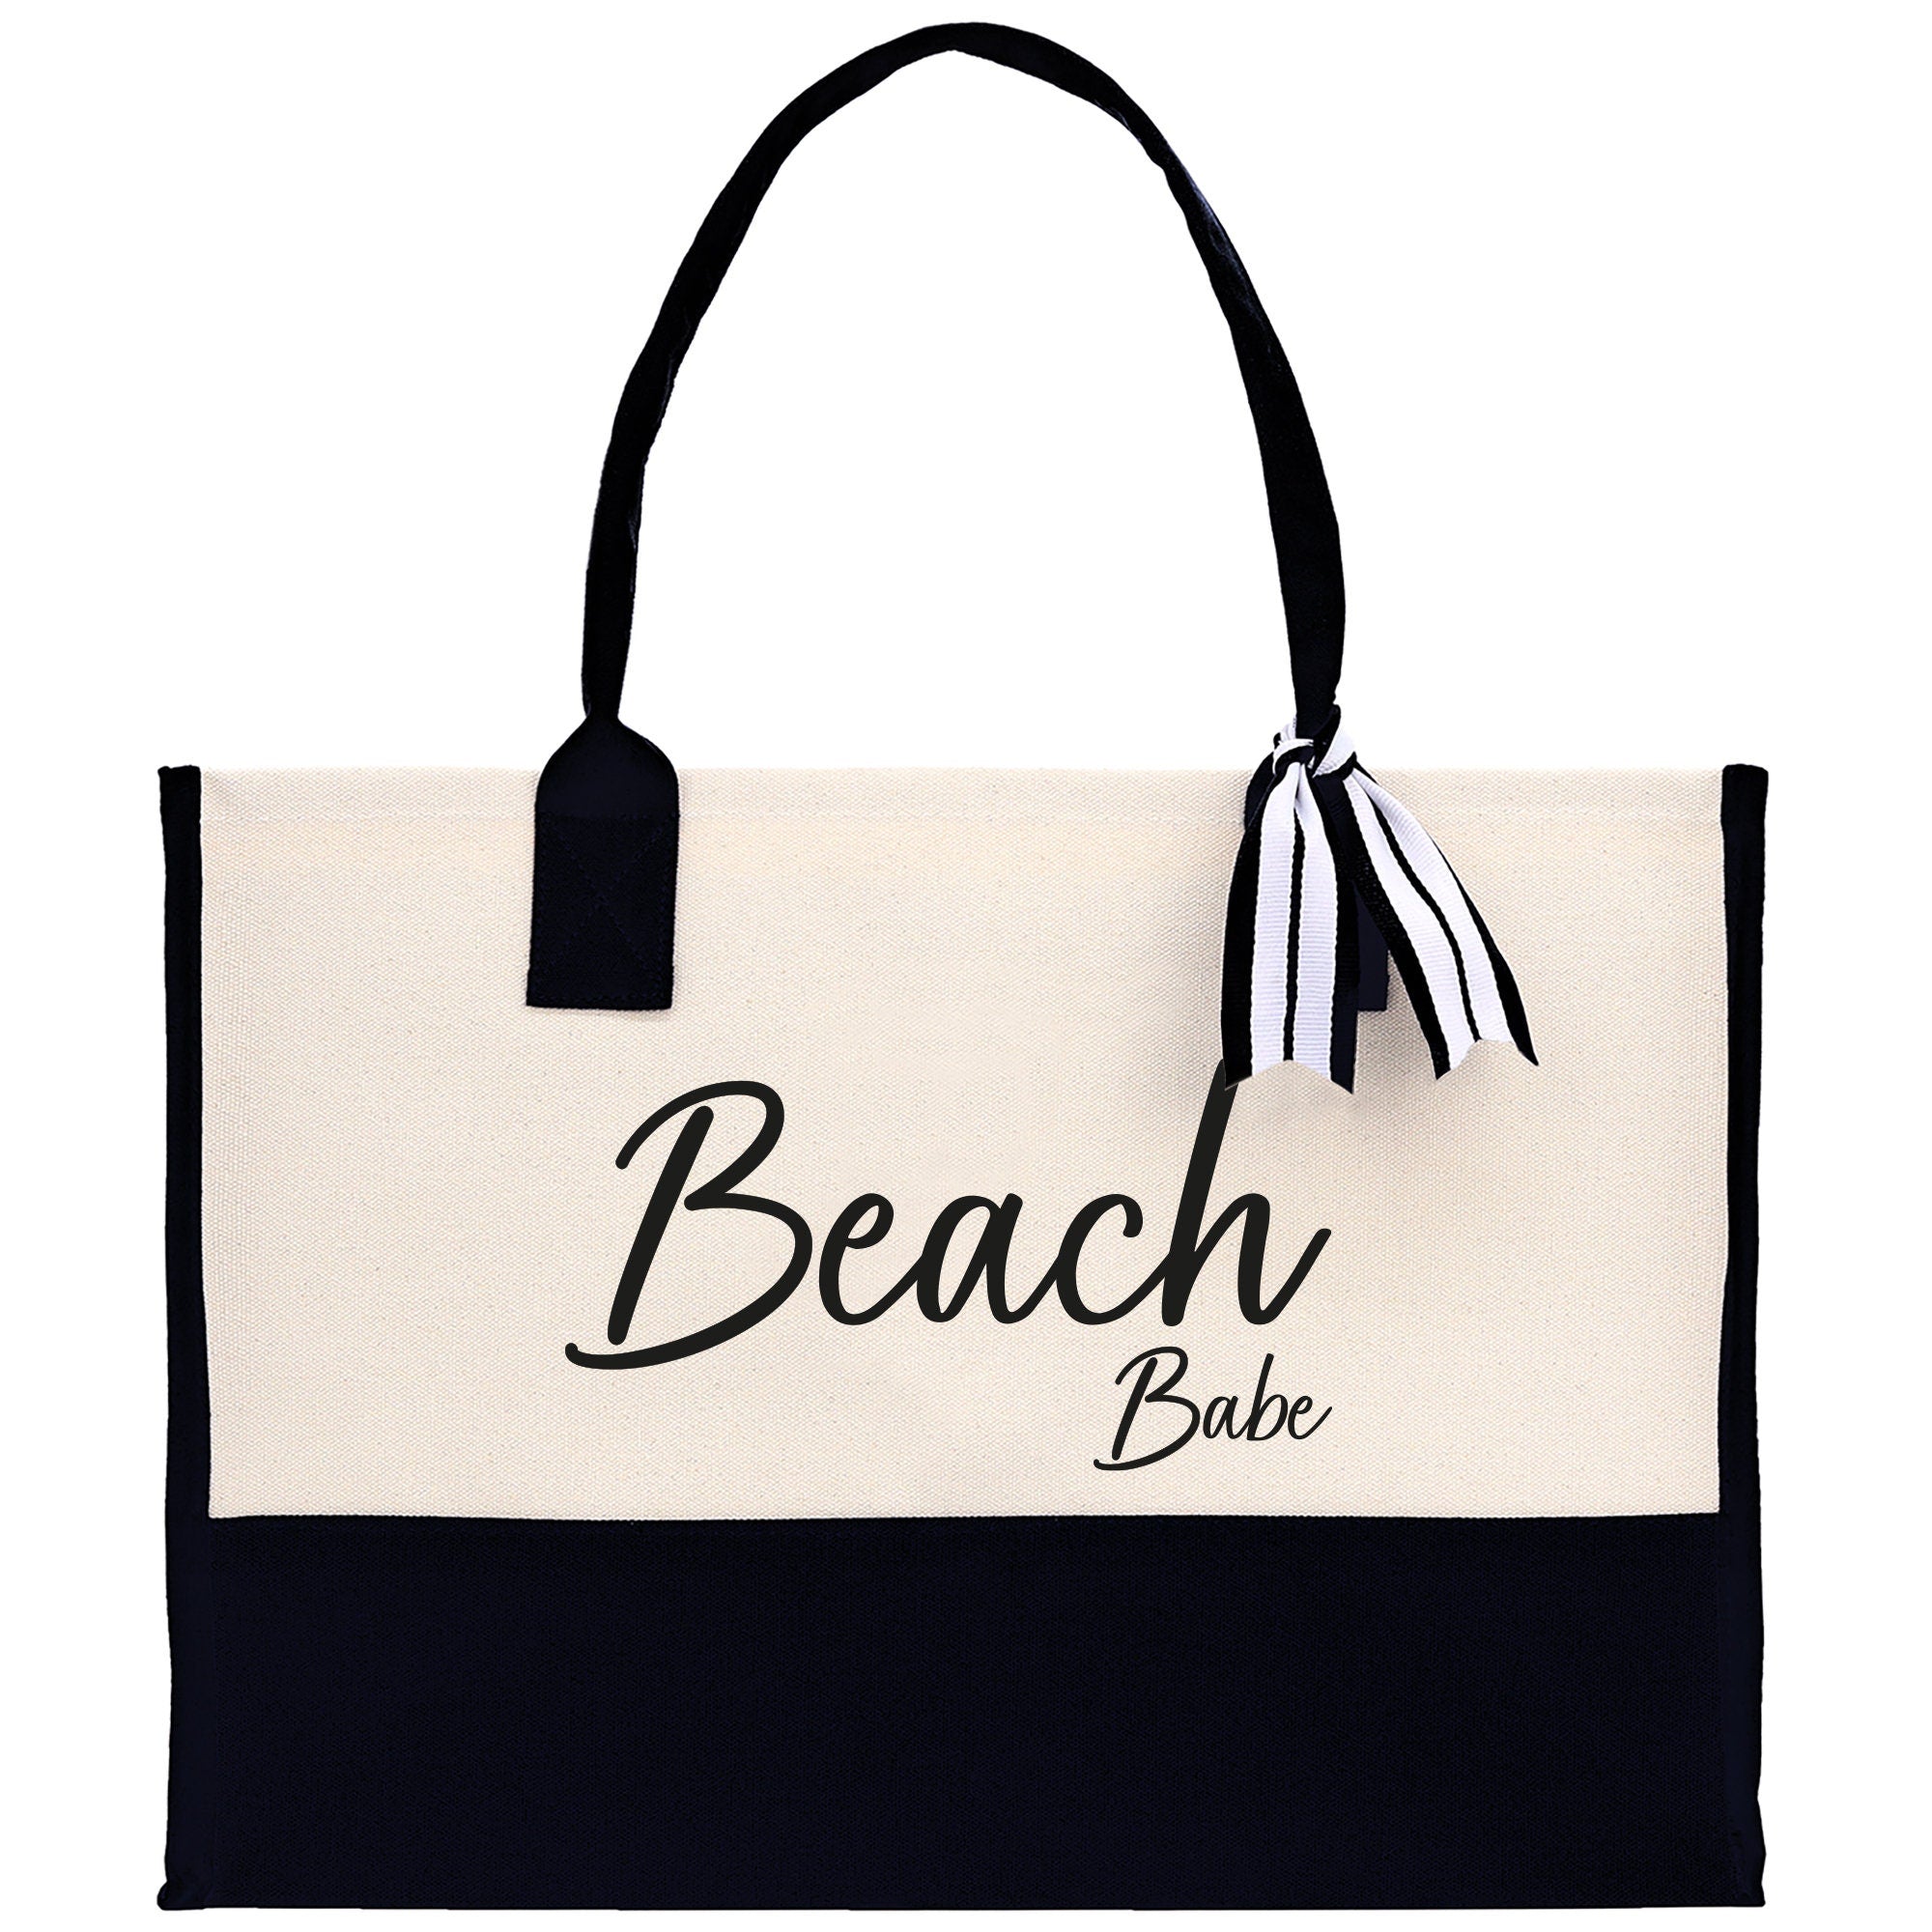 Beach Babe Canvas Tote Bag Birthday Gift for Her Weekender Tote Bag Beach Tote Bag Large Beach Tote Bag